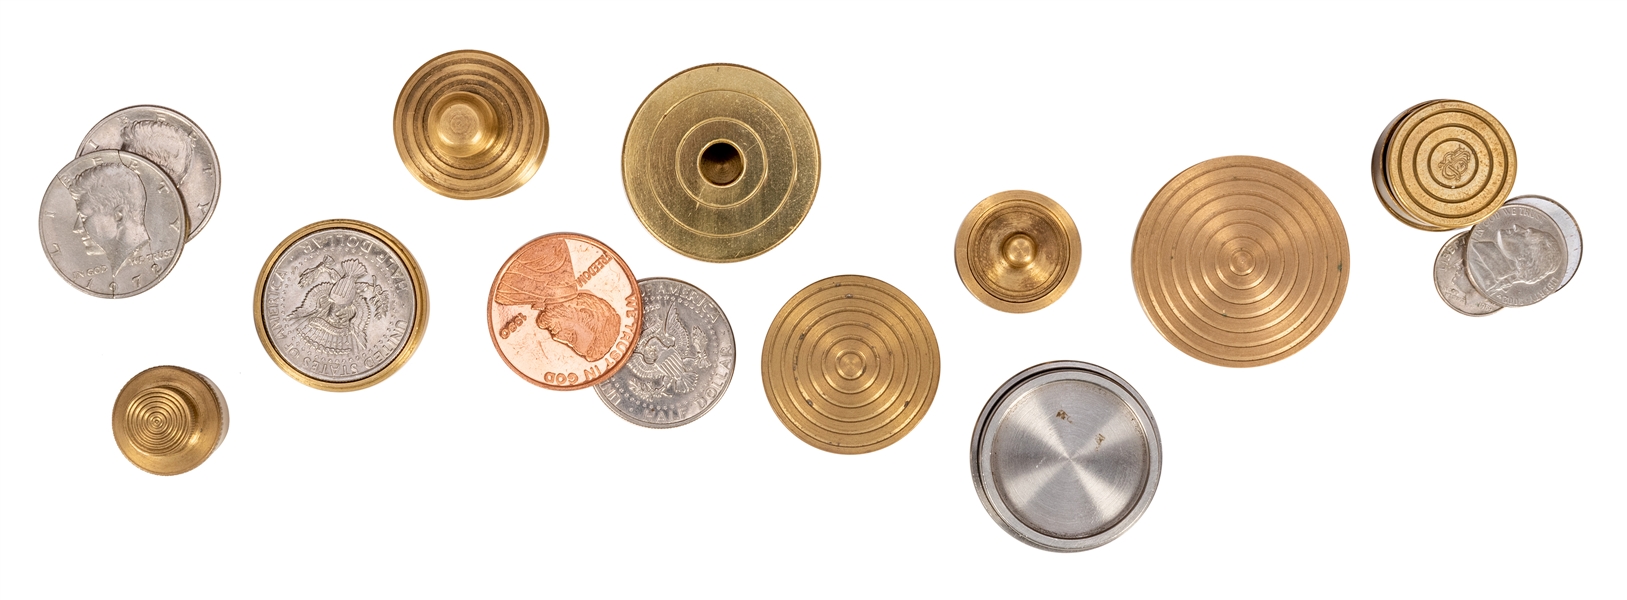 Collection of Brass and Metal Coin and Close-Up Magic tricks.